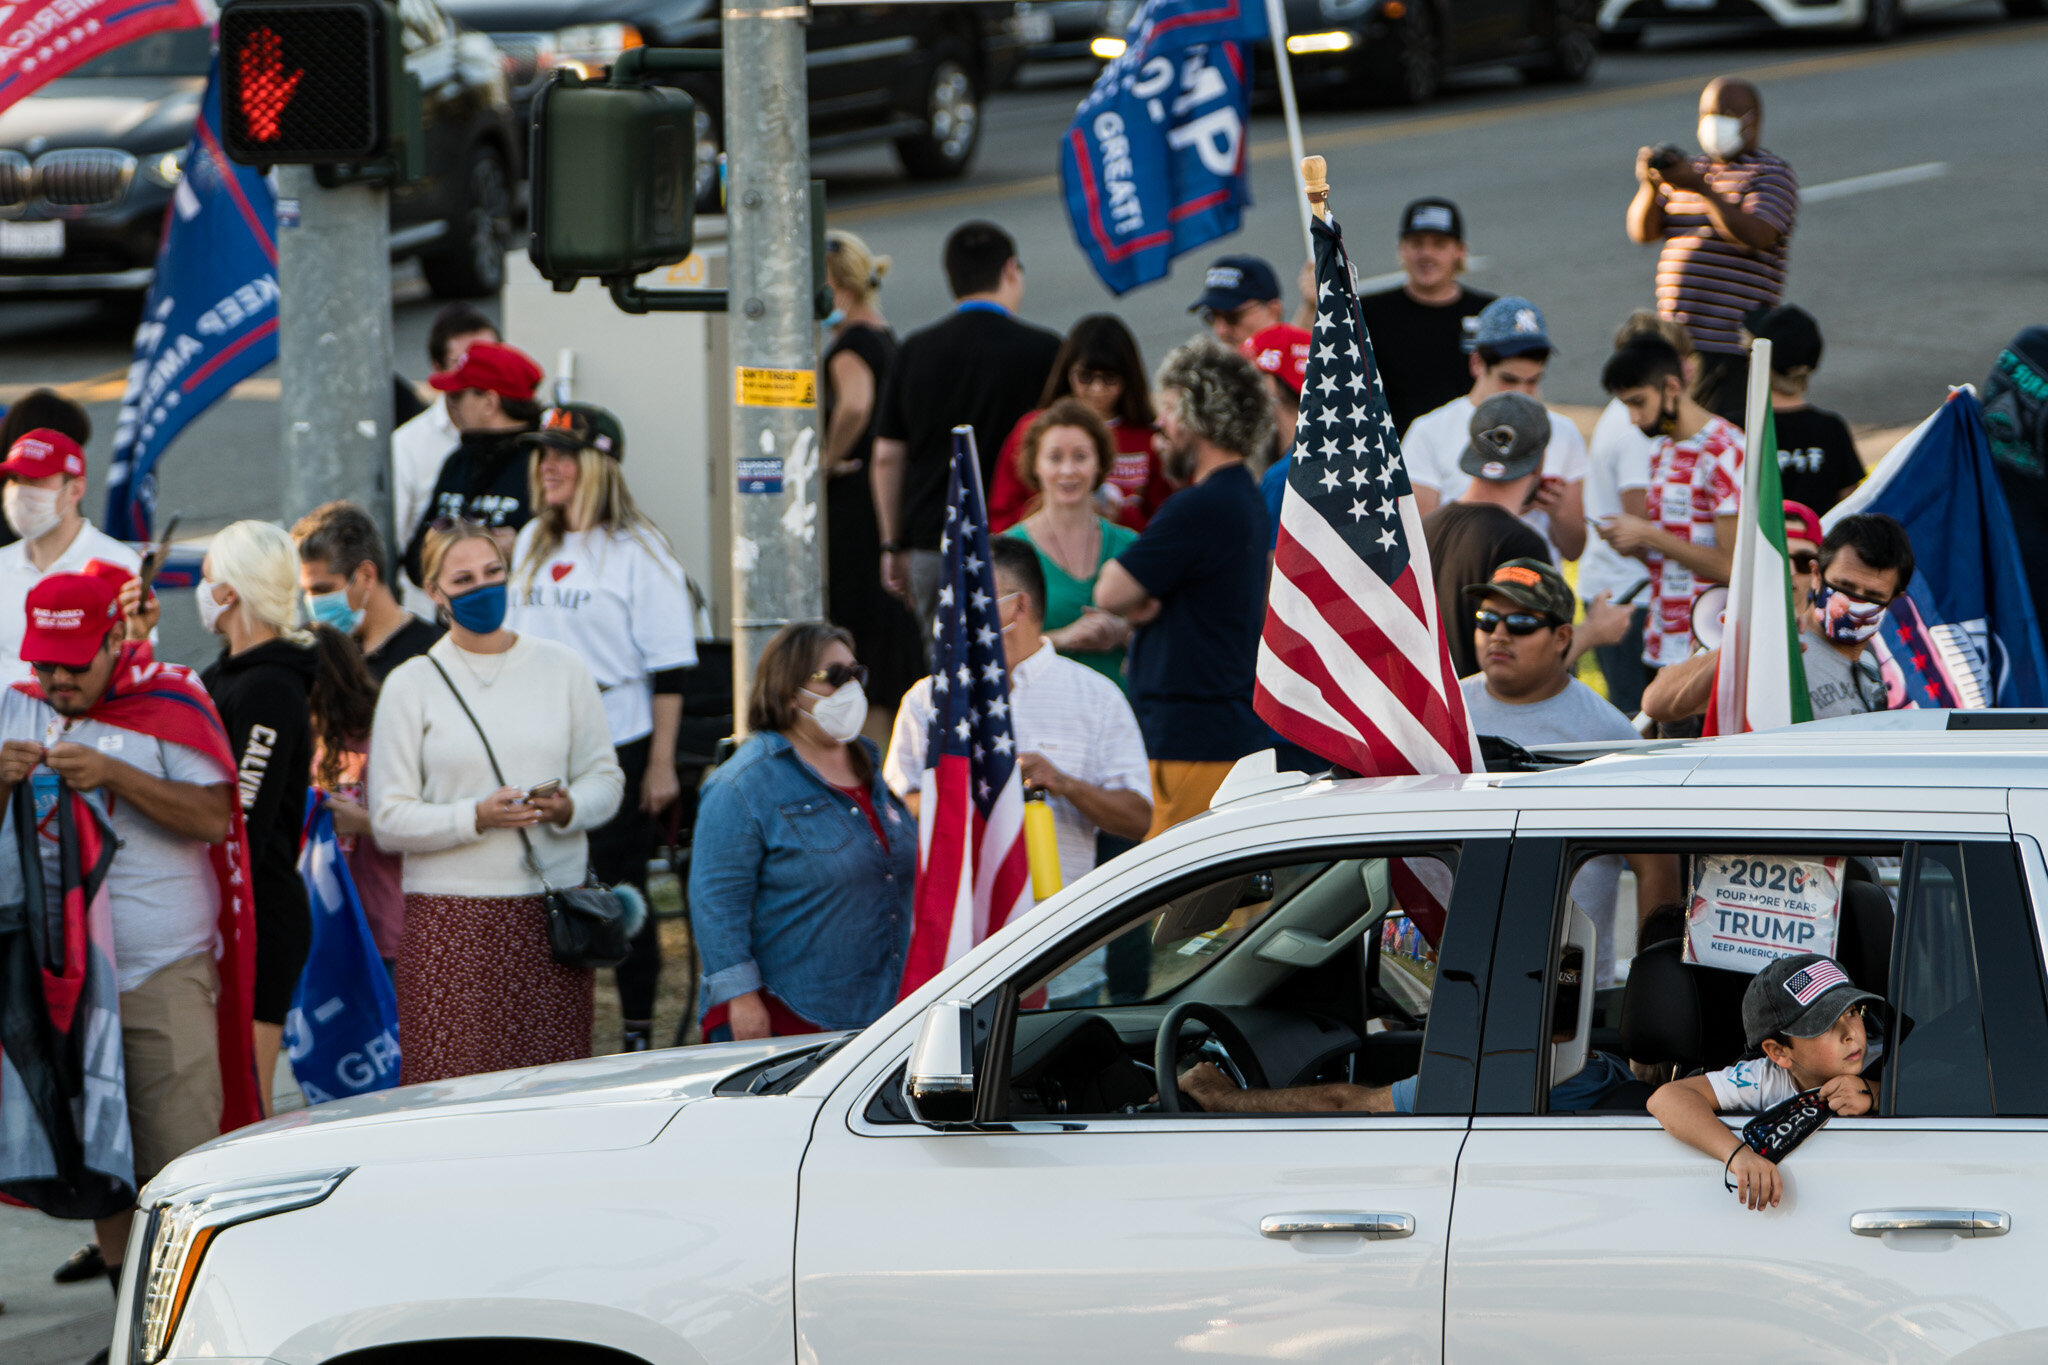  With just over twenty-four hours until election day, Trump supporters assembled in Beverly Hills, California on 11/1/2020. The group stationed themselves on Santa Monica Boulevard, and then proceeded to march down Beverly Blvd. and Rodeo Drive to sh